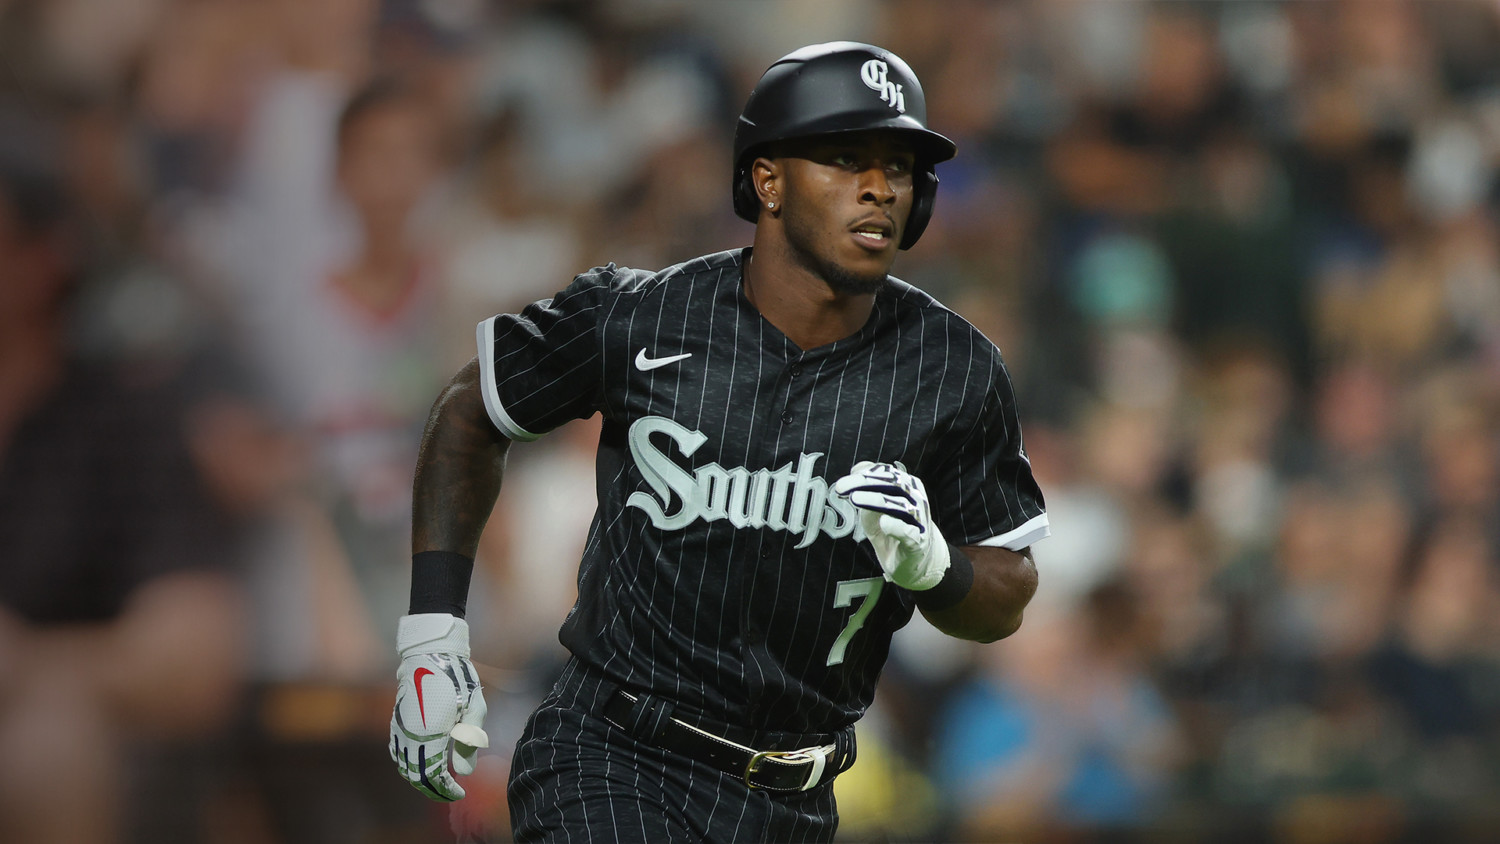 White Sox New 'Southside' Uniforms Out Swaggered the Whole League